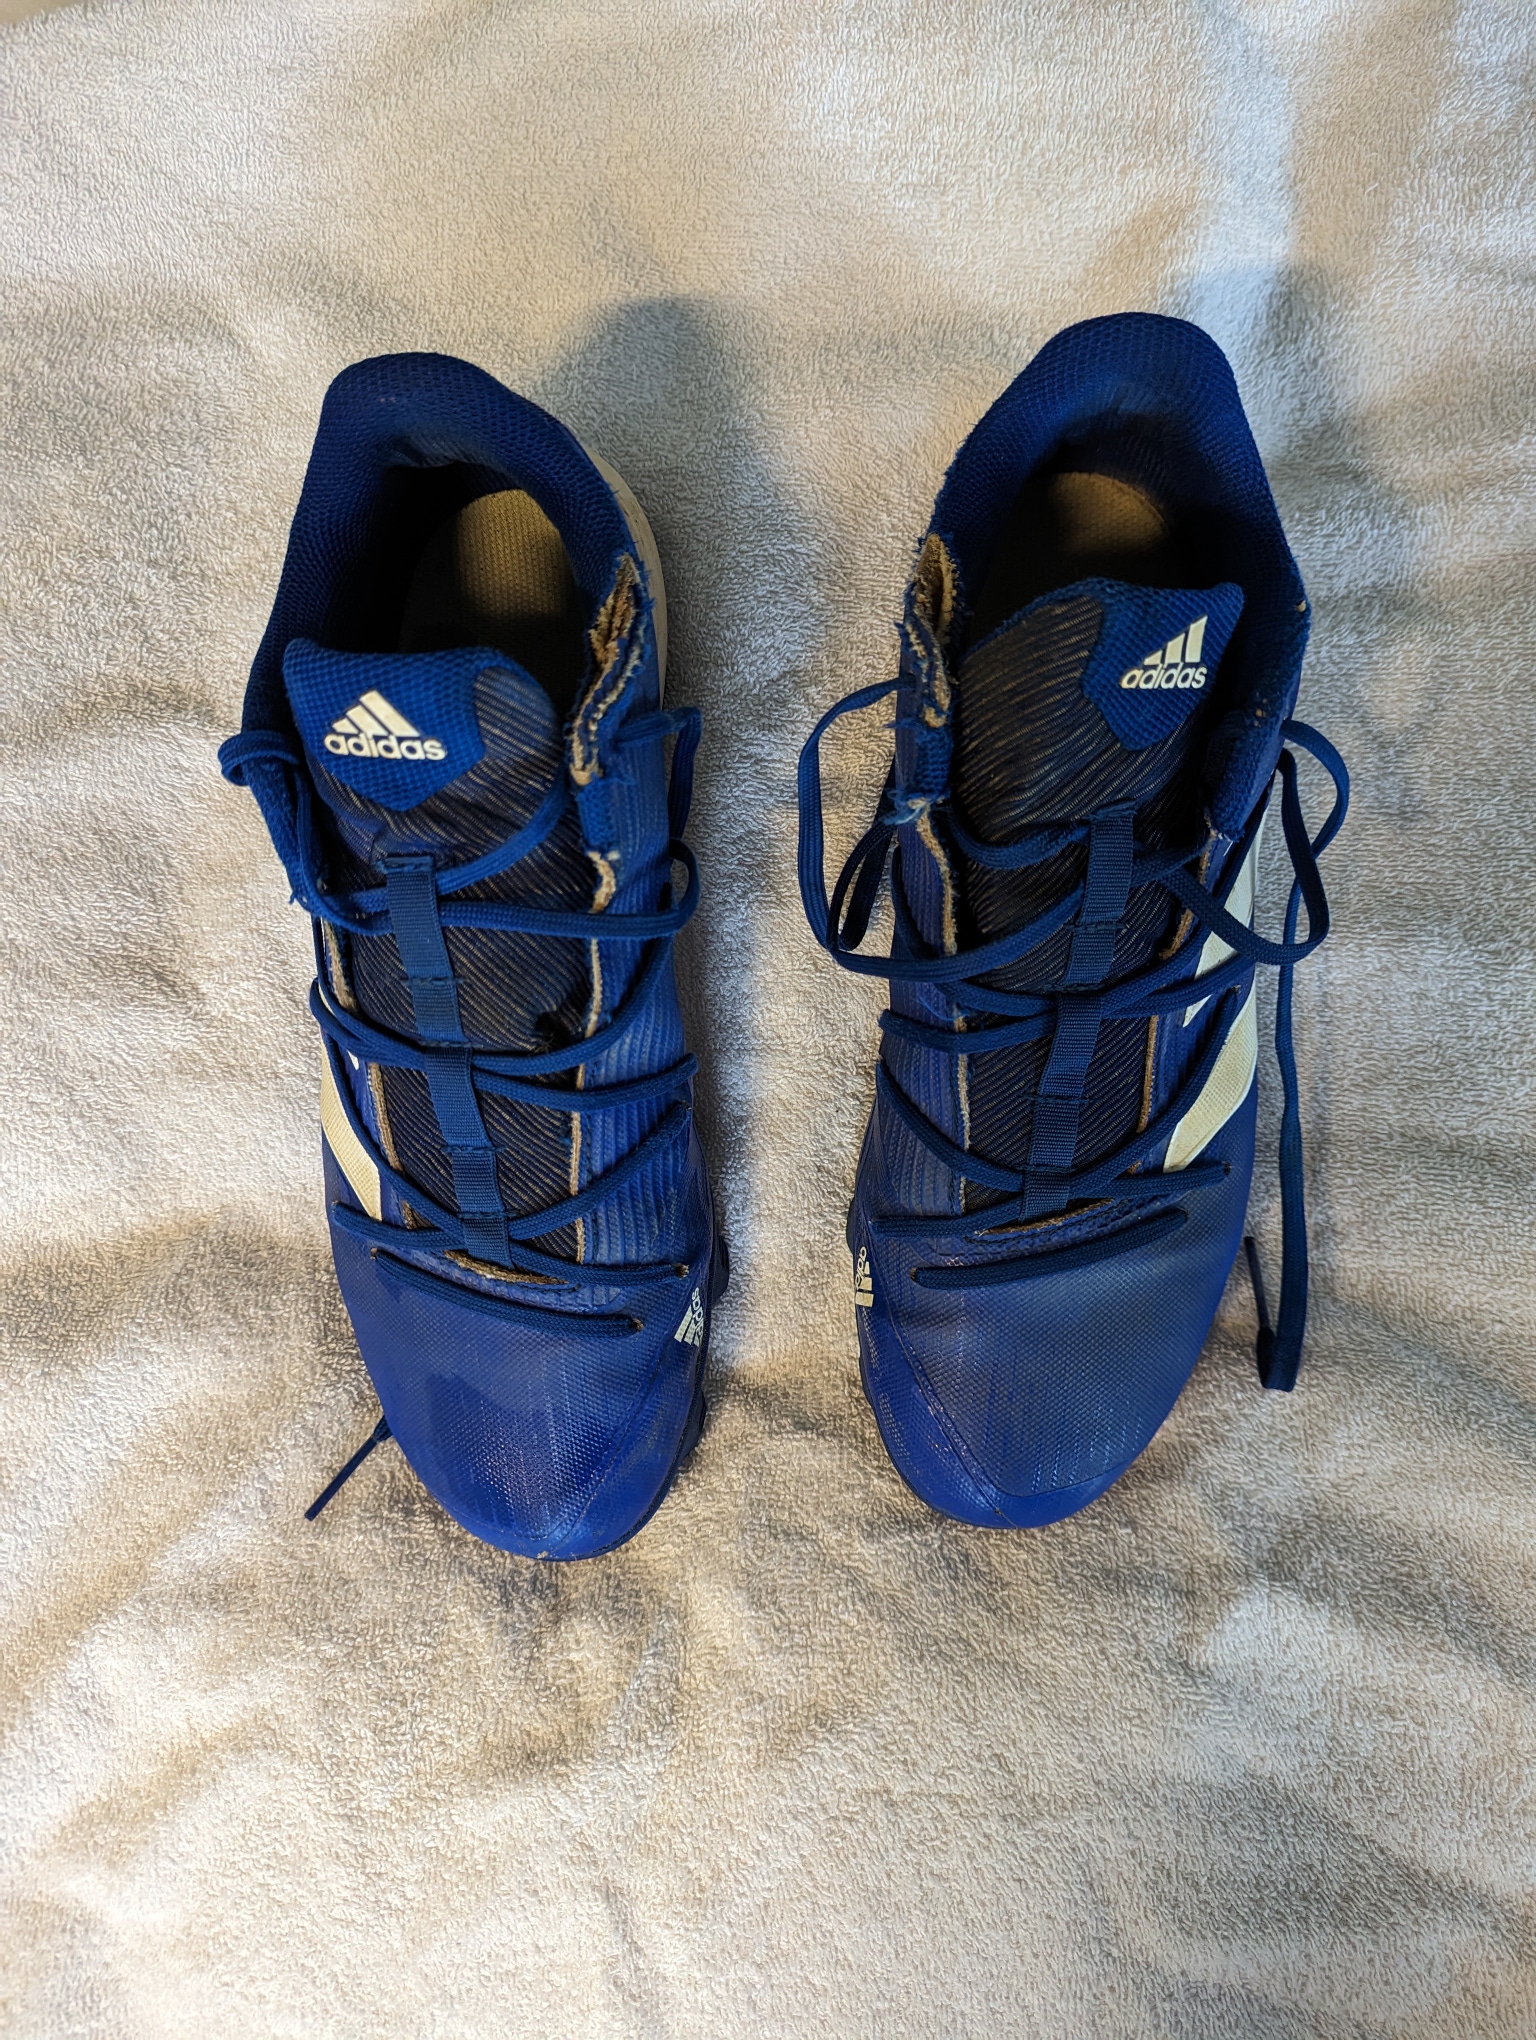 Blue Adult Men's Used Size 9.5 (Women's 10.5) Molded Cleats Adidas Low Top Adizero Afterburner